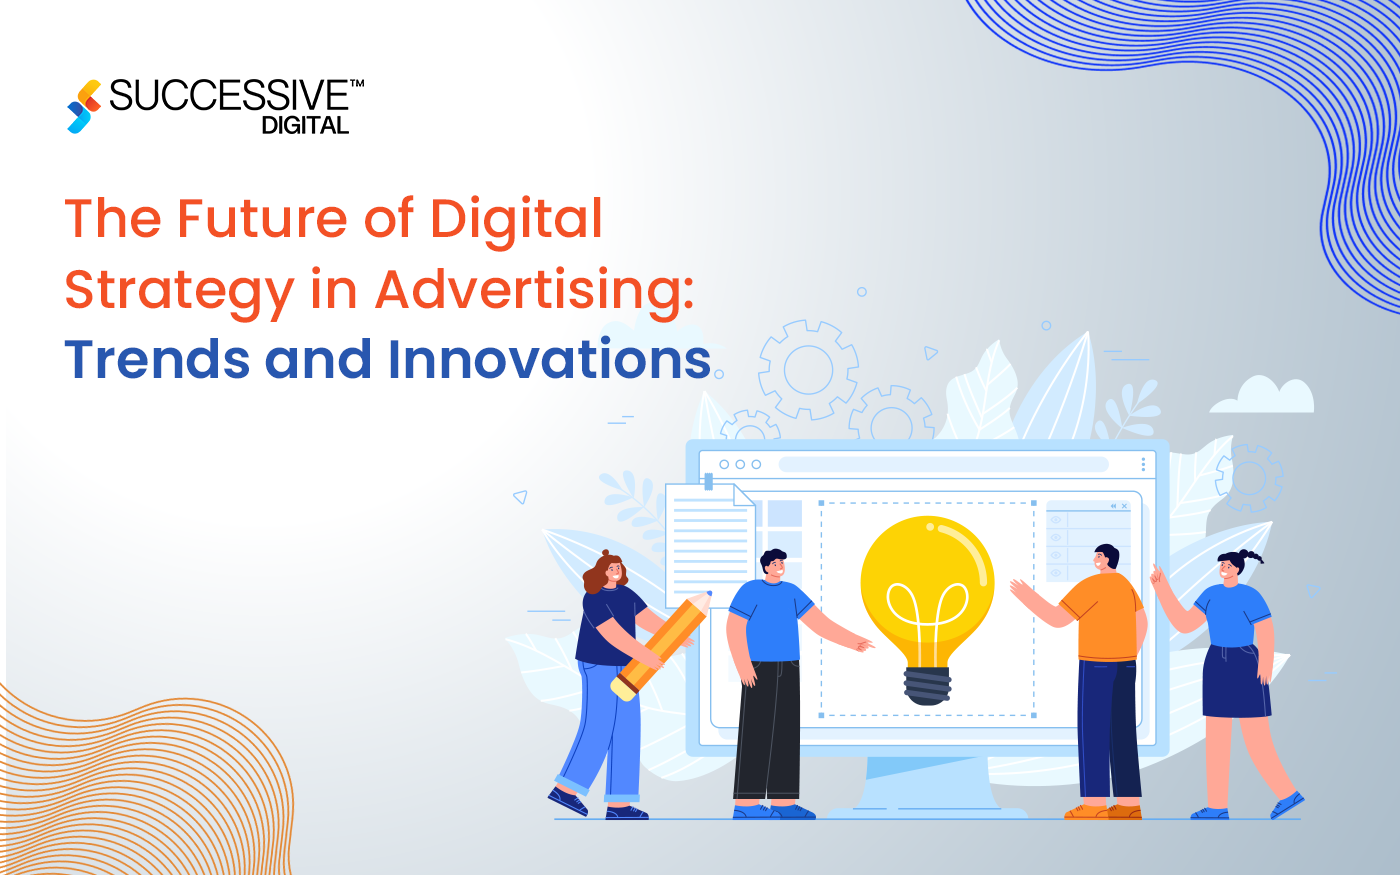 The Future of Digital Strategy in Advertising: Trends and Innovations